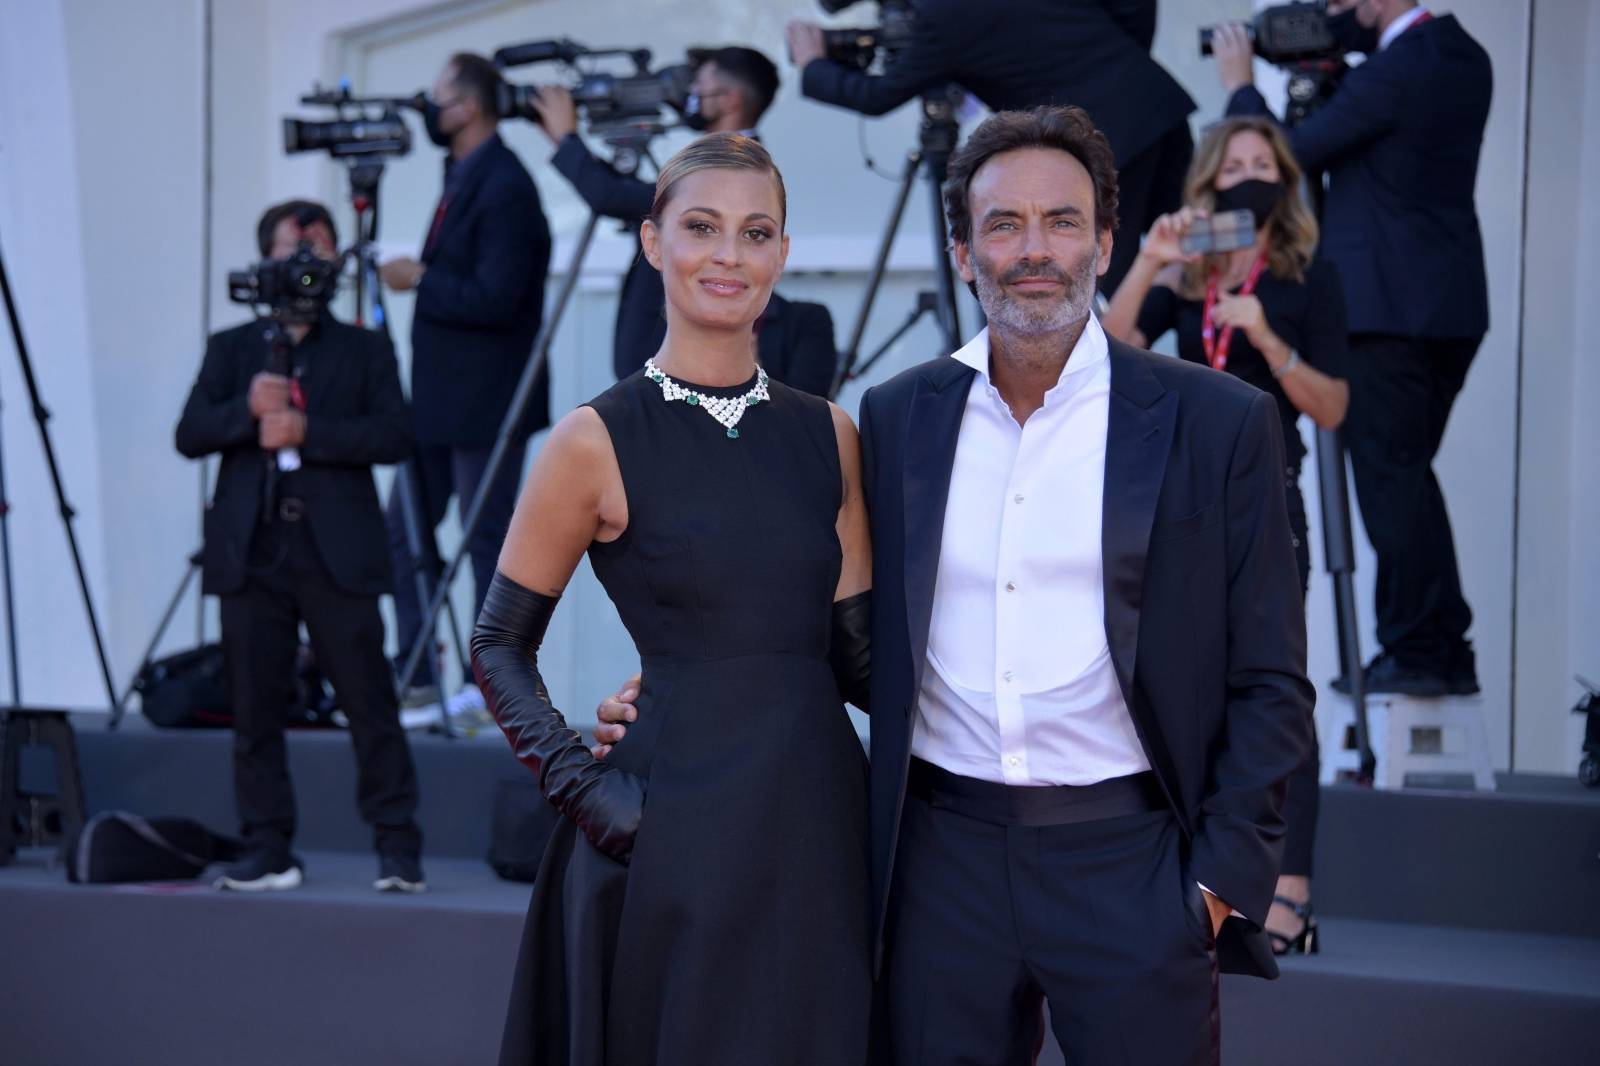 77th Venice Film Festival 2020, Red Carpet Film Lacci and opening ceremony